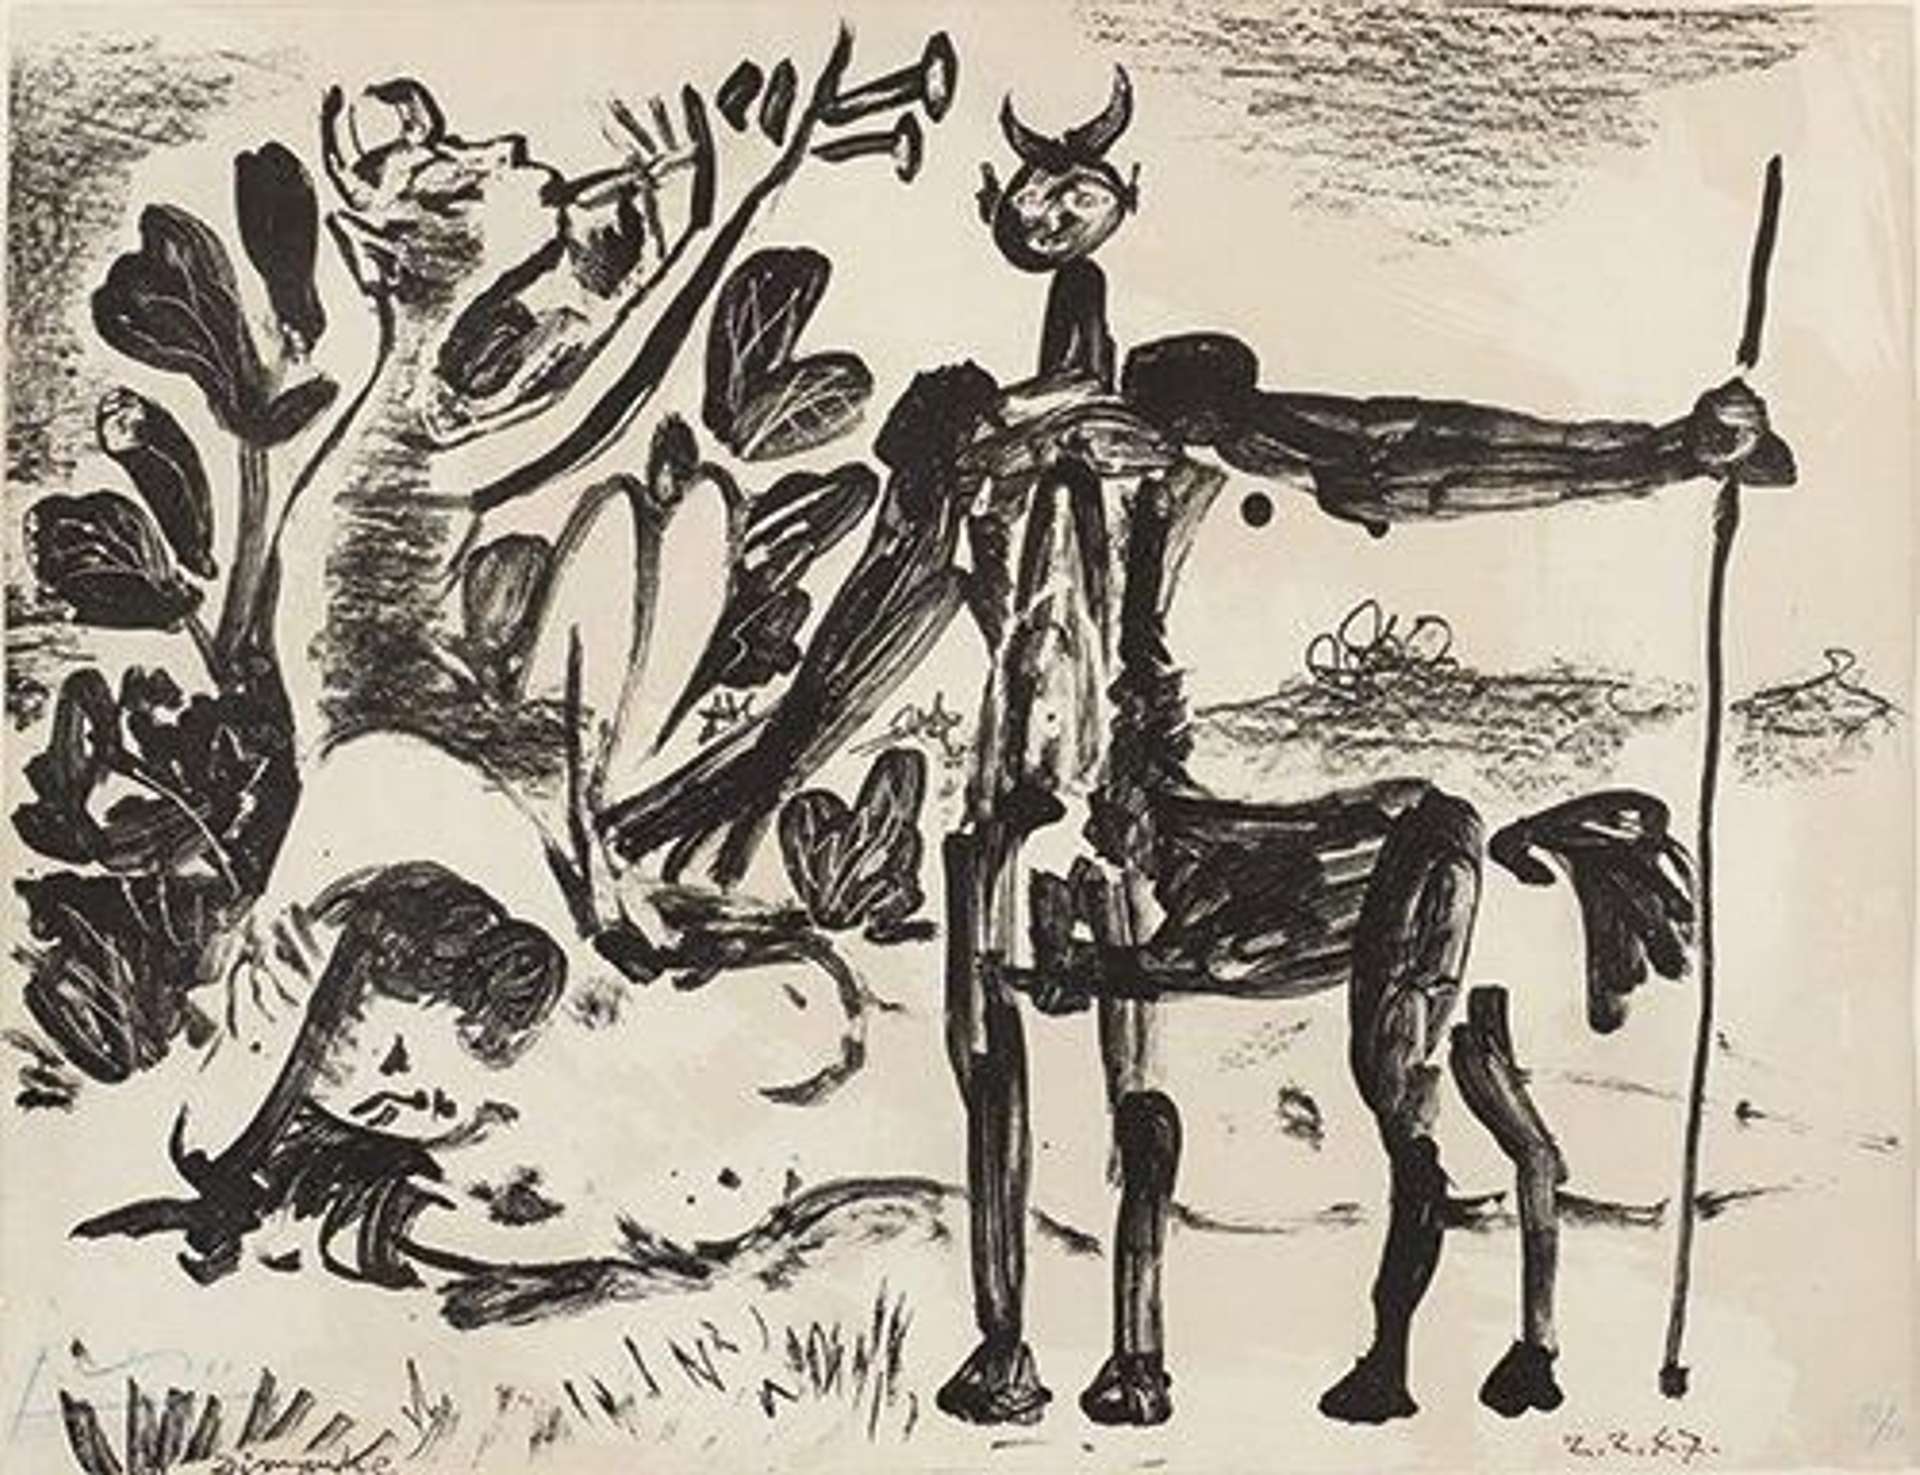 This lithograph by Picasso shows the figure of a centaur meeting a faun in a countryside scene. The two figures are standing over a nude female figure.